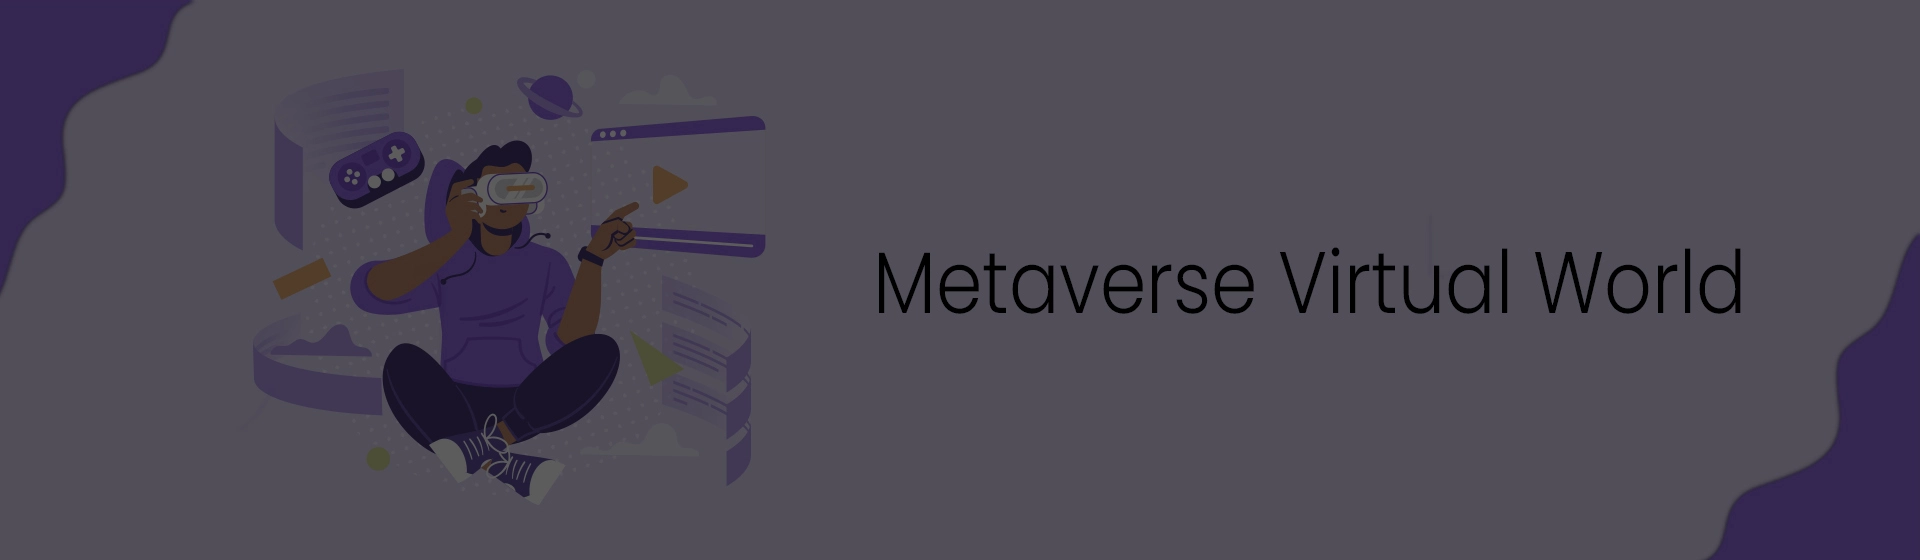 What are the important steps to creating a metaverse virtual world?